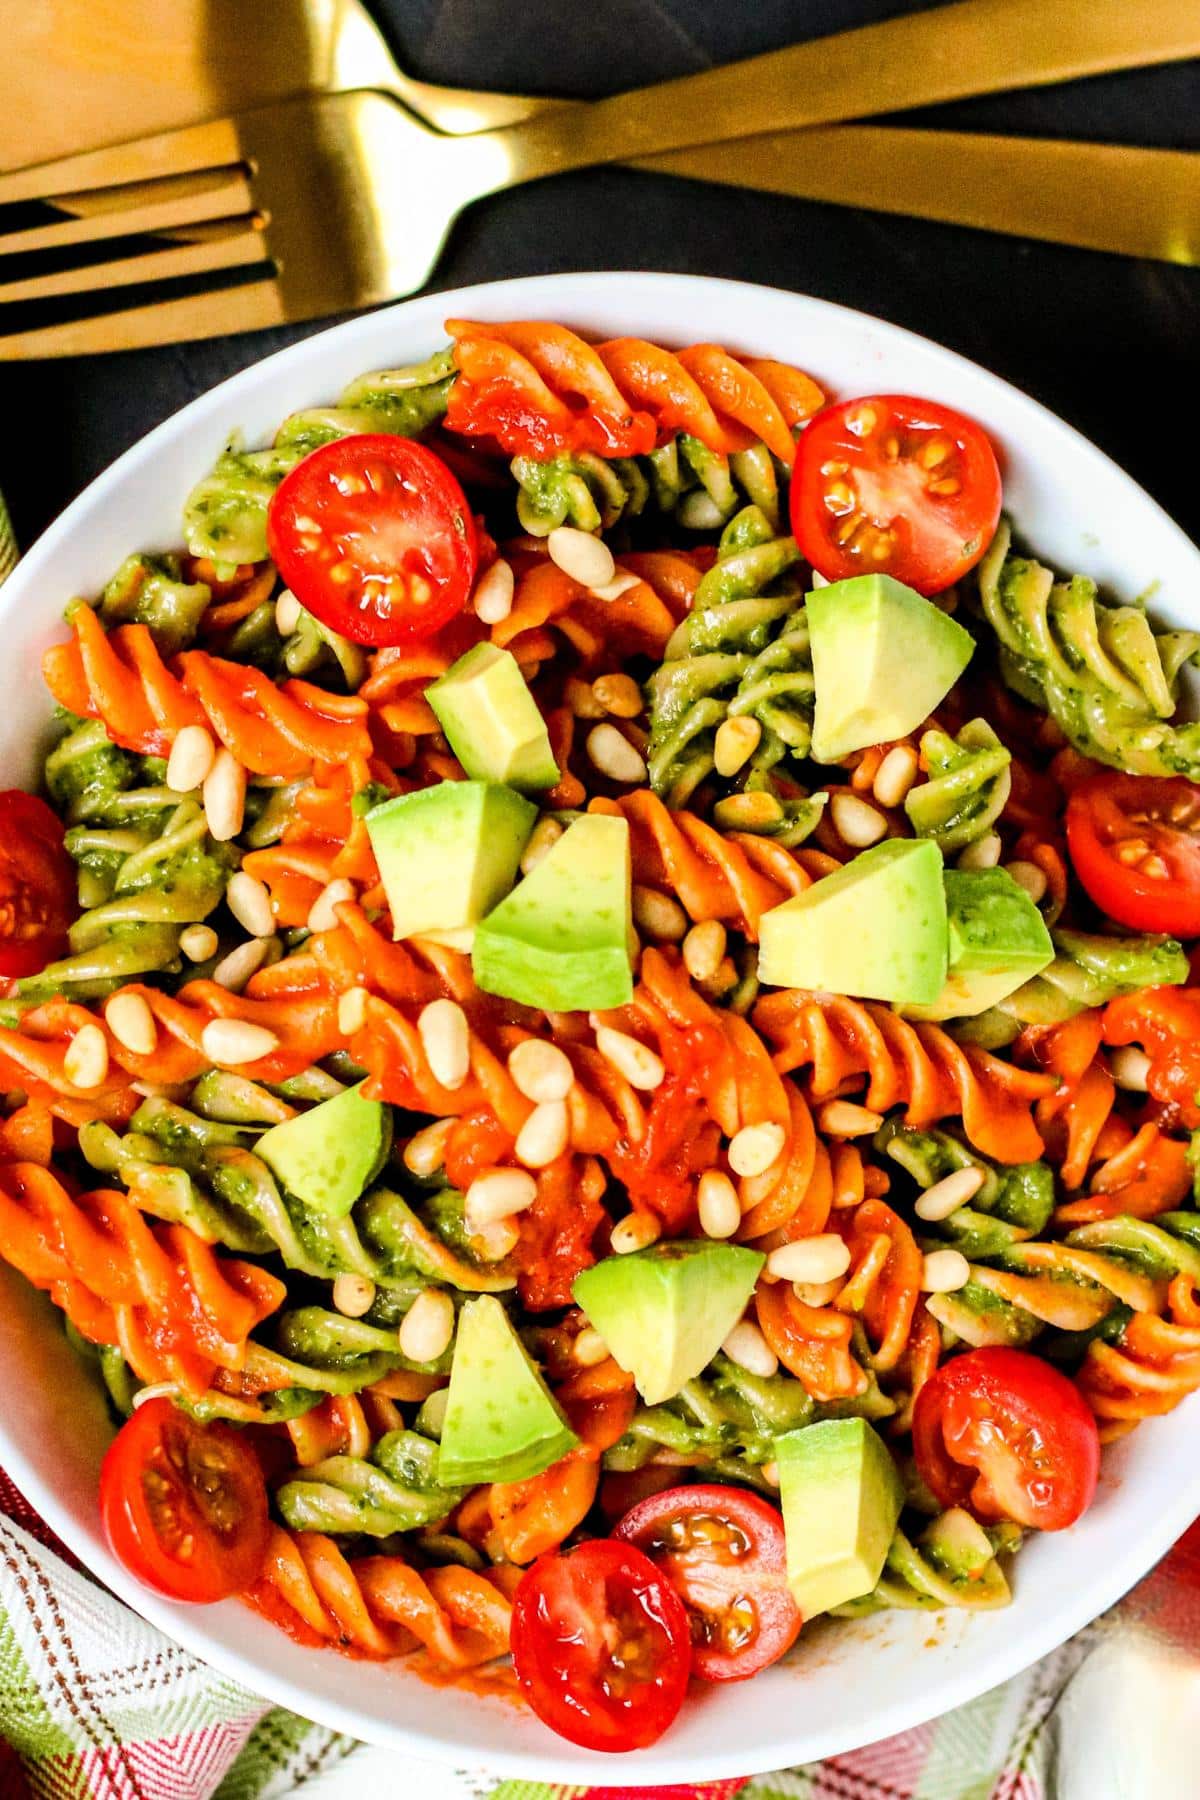 Bowl of rotini pasta tossed with red and green sauces topped with cherry tomatoes, avocado, and pine nuts with gold serving utensils.